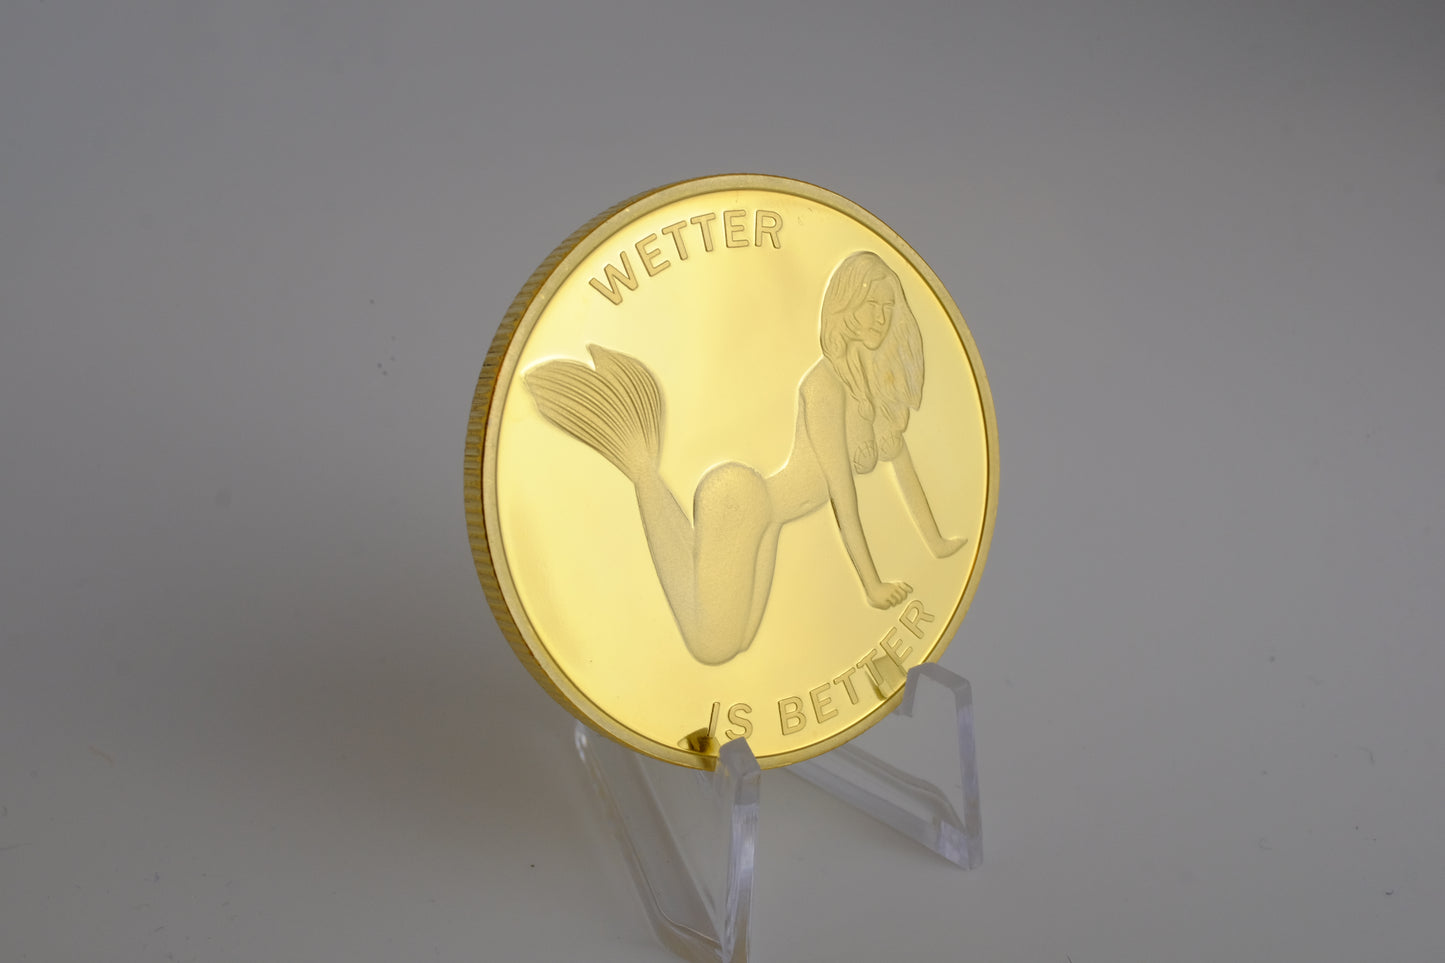 Wetter is Better Coin : Pocket Friendly. Enjoy at your own risk.